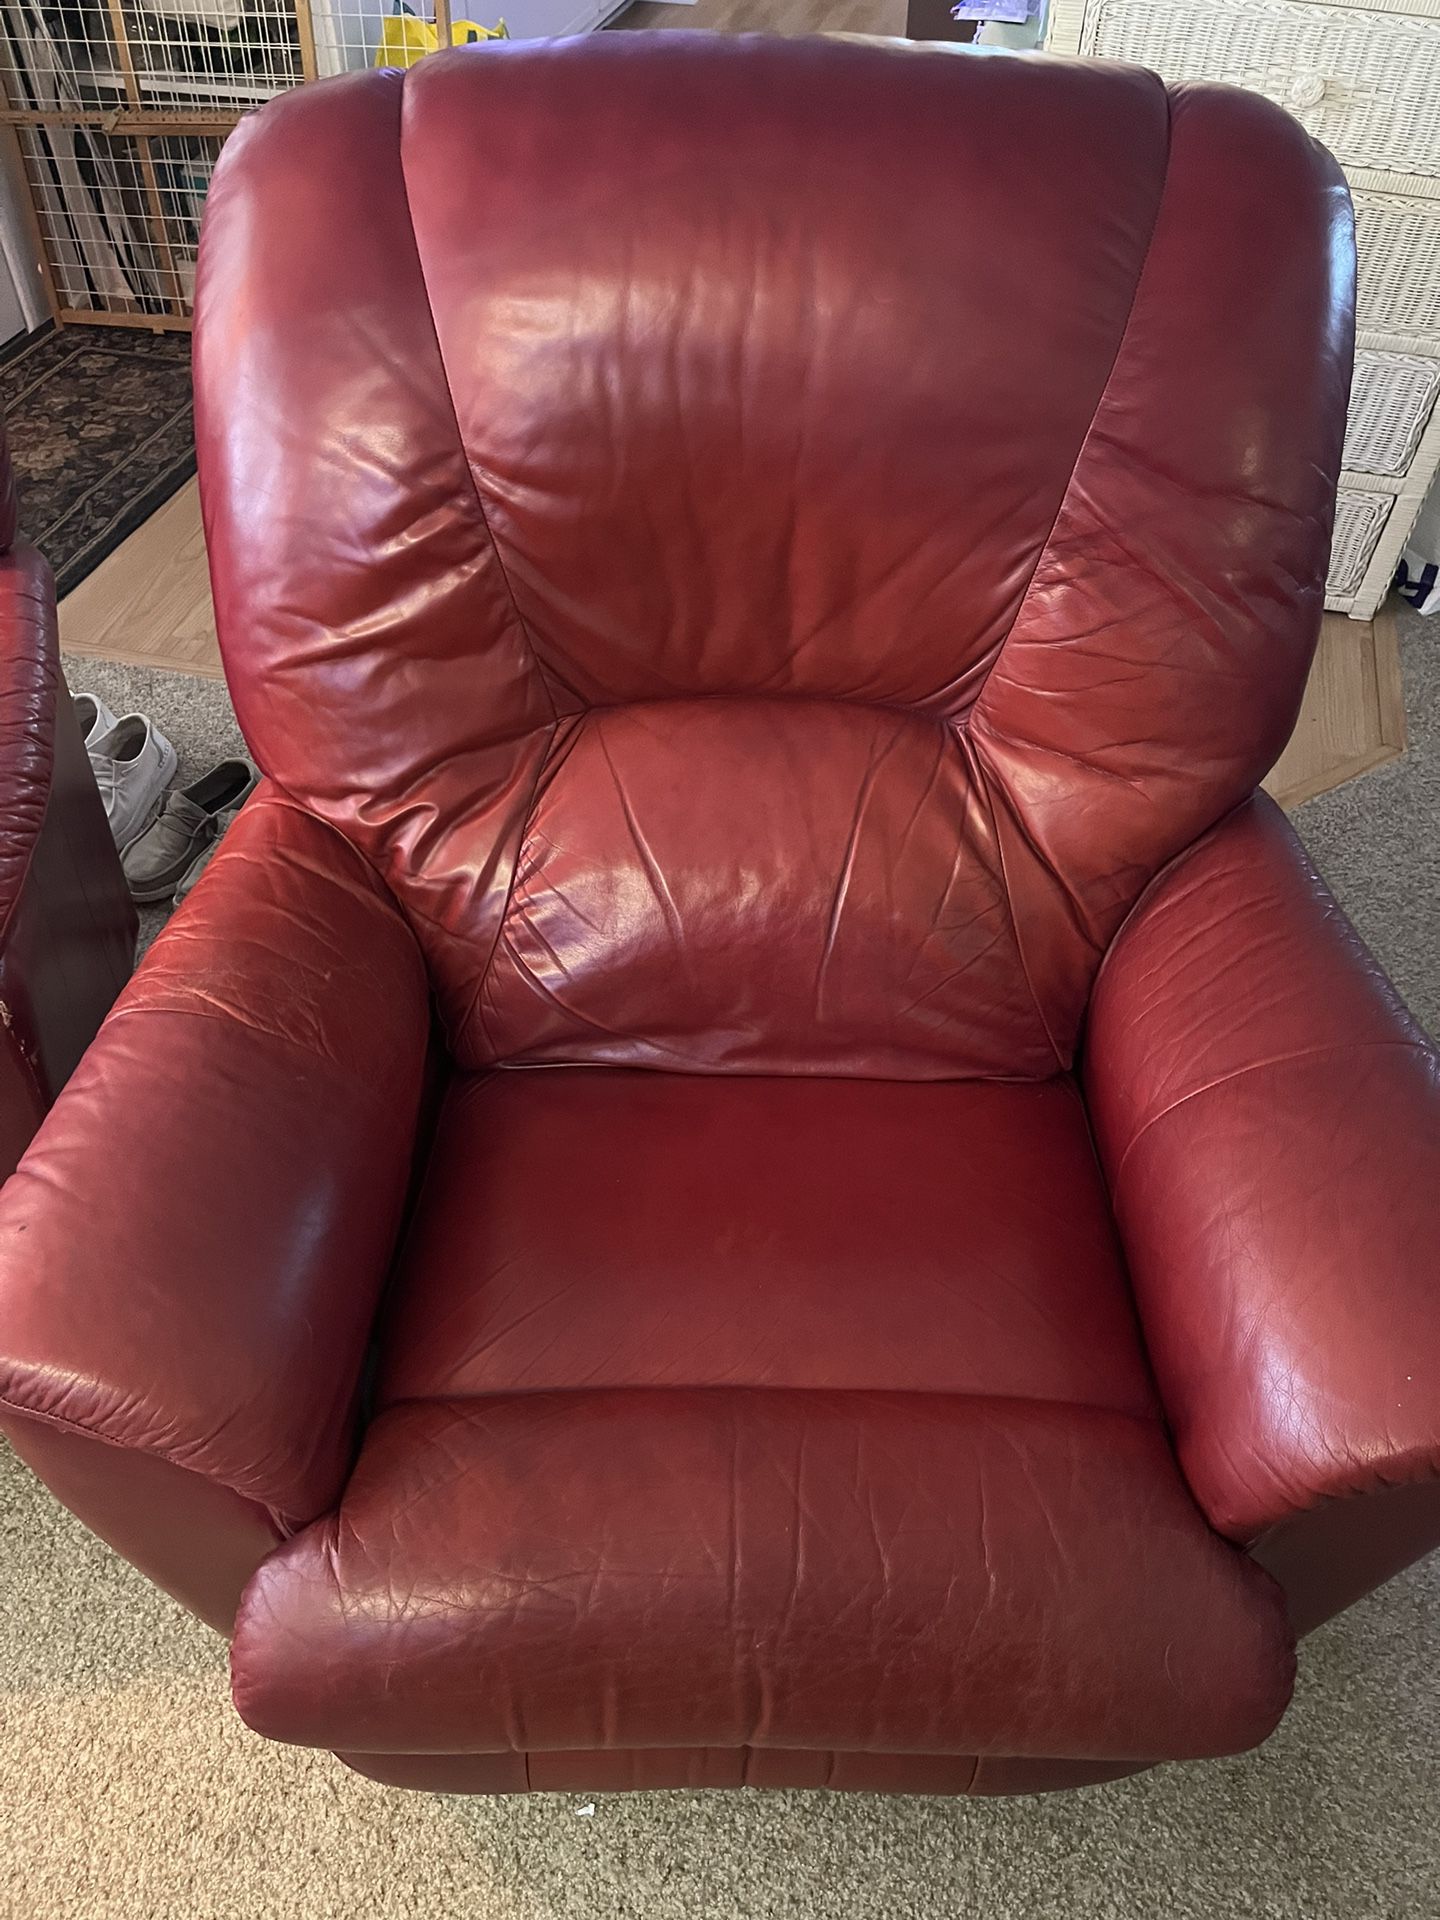 Pair Of Red Leather Recliners Reduced